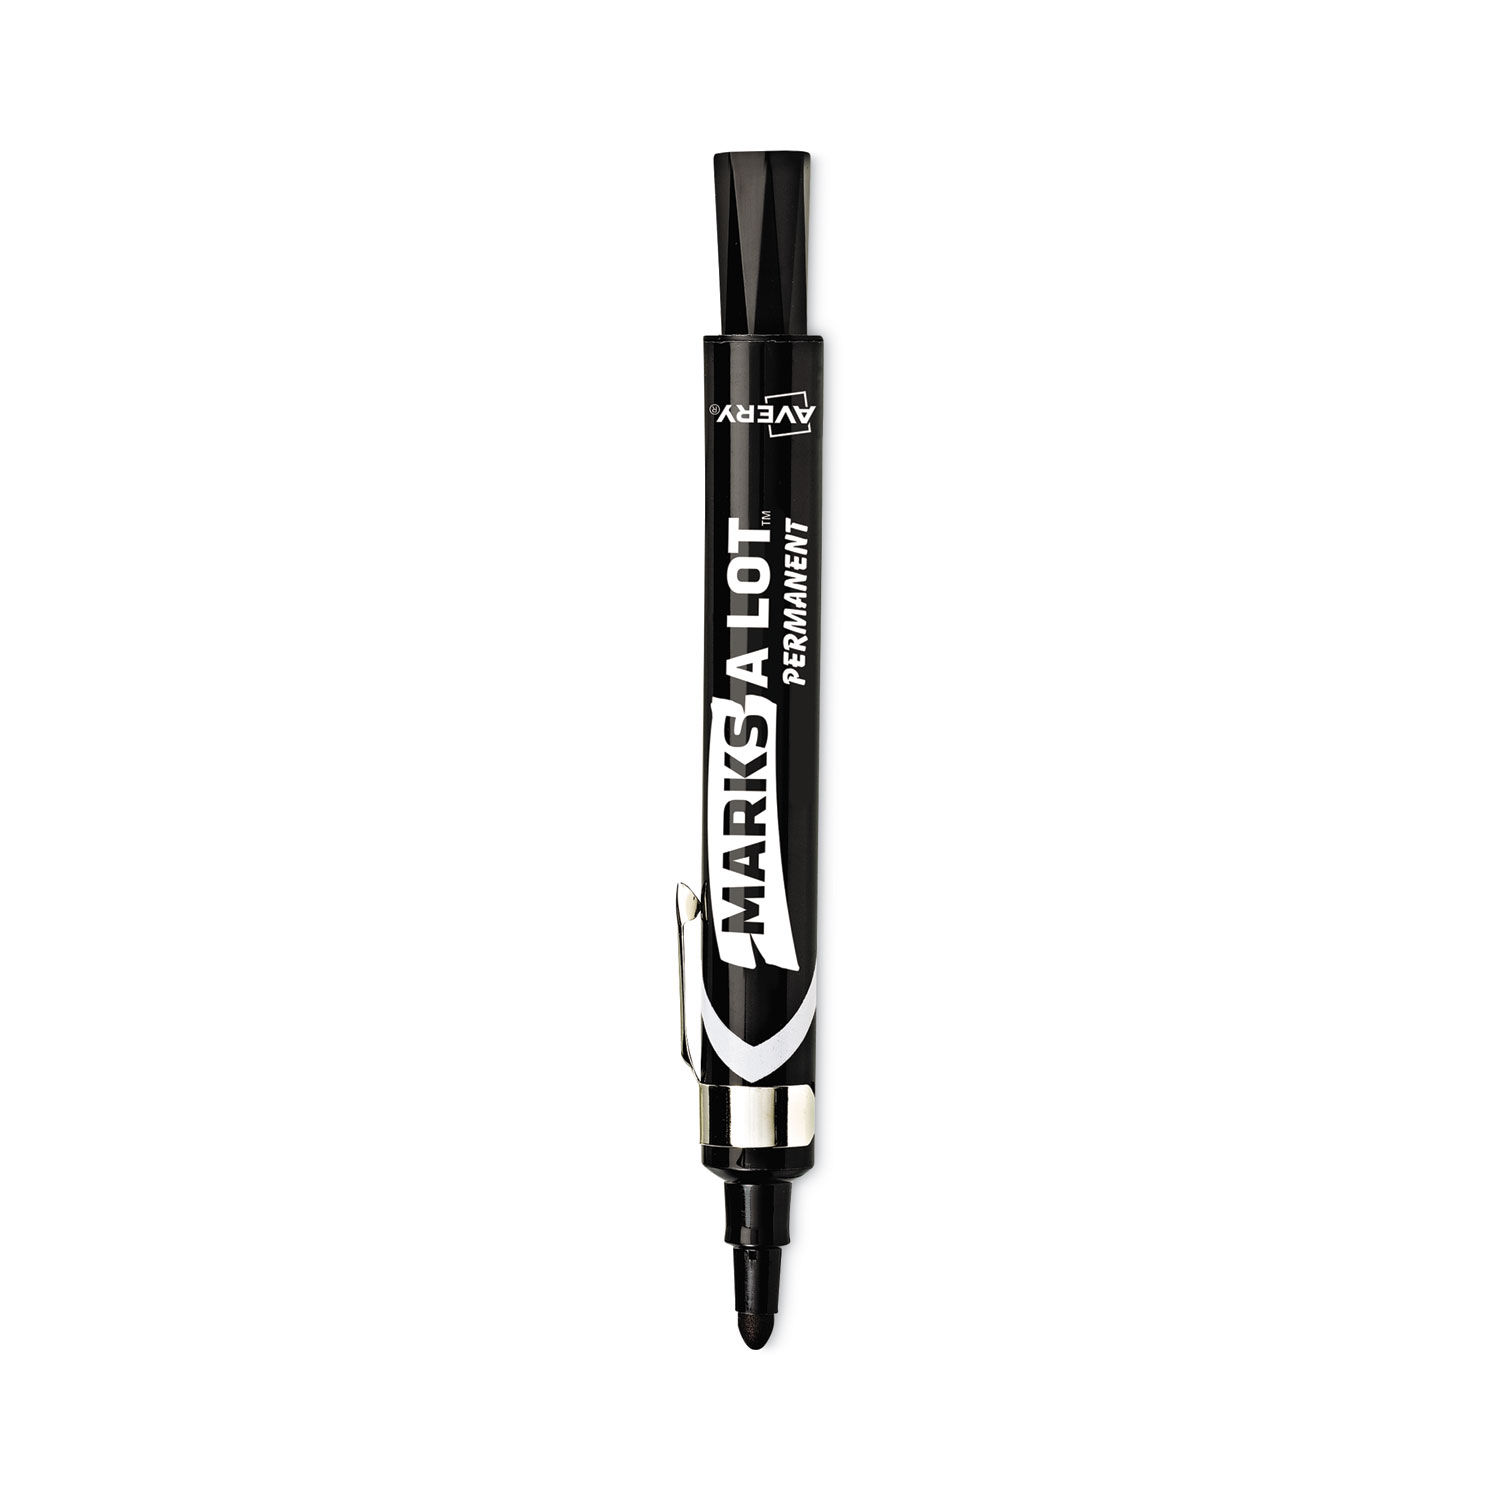 MARKS A LOT Large Desk-Style Permanent Marker with Metal Pocket Clip by Averyandreg; AVE24878